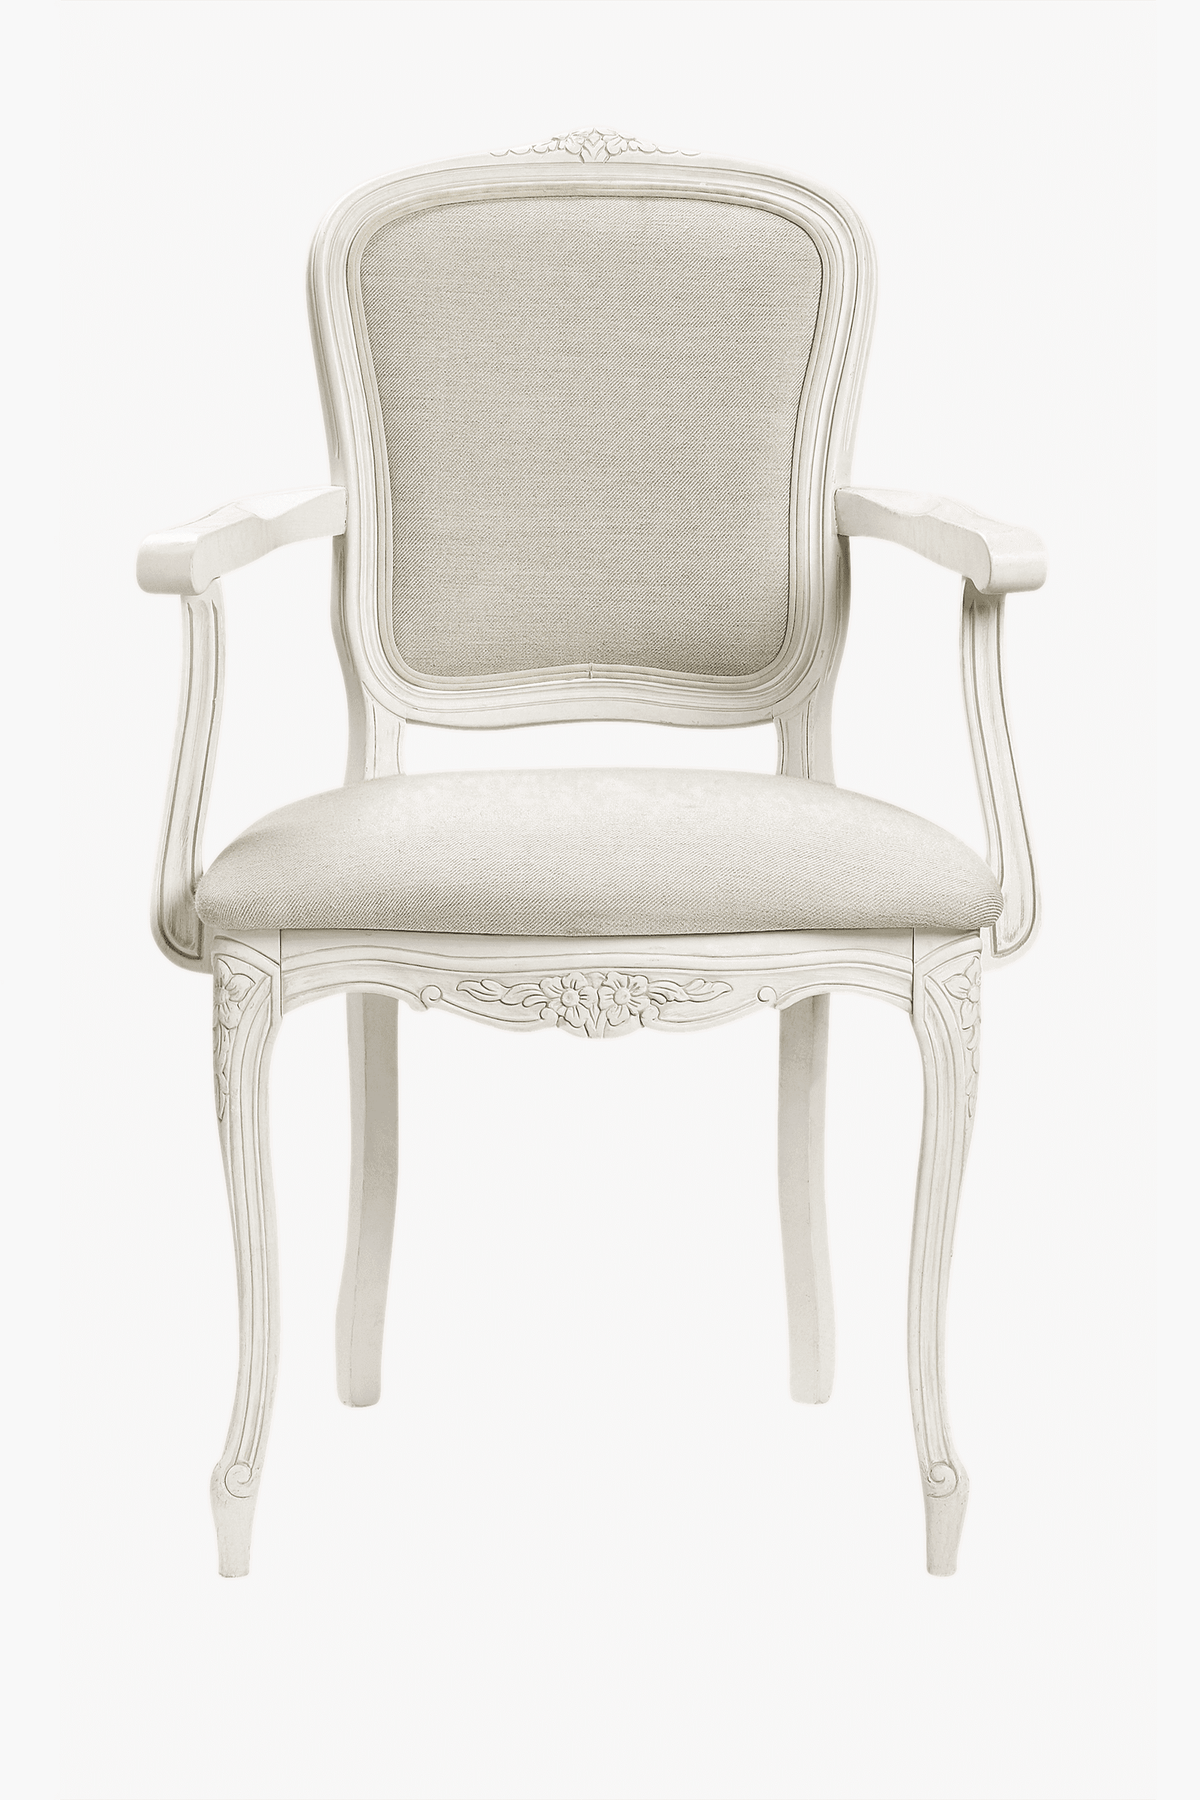 Provencale Carver Chair